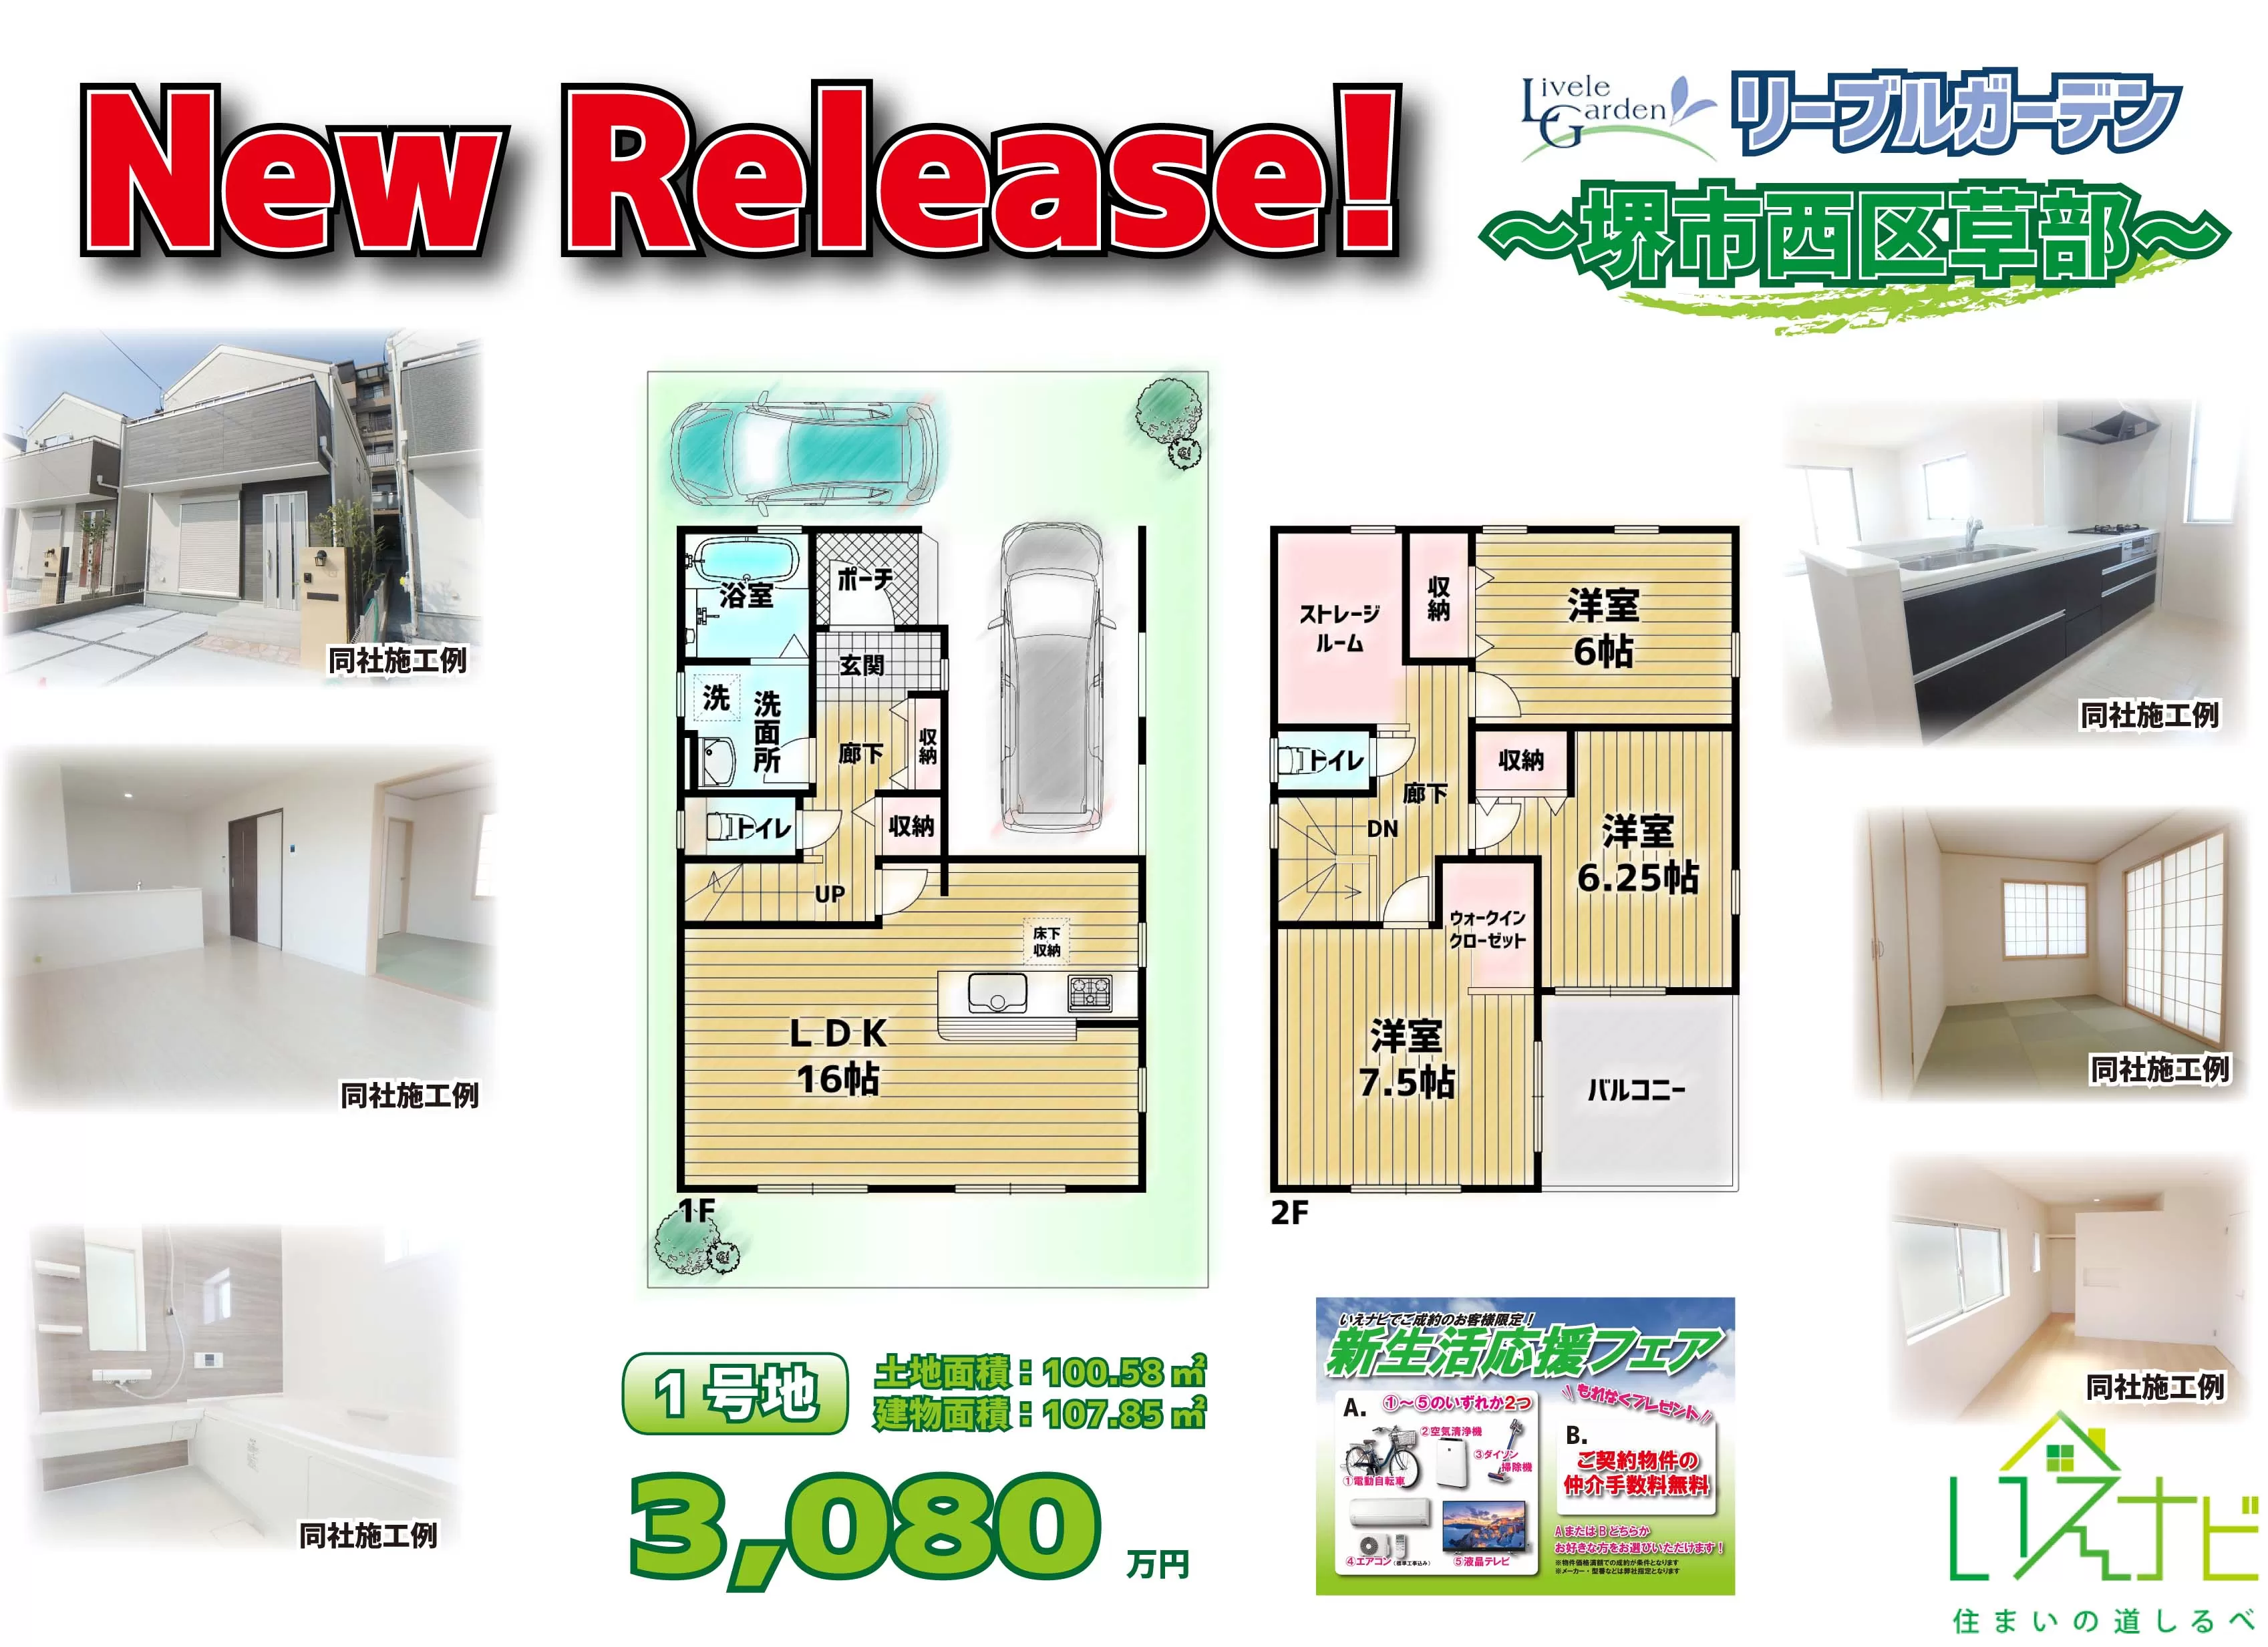 New Release ～リーブルガーデン堺市西区草部～